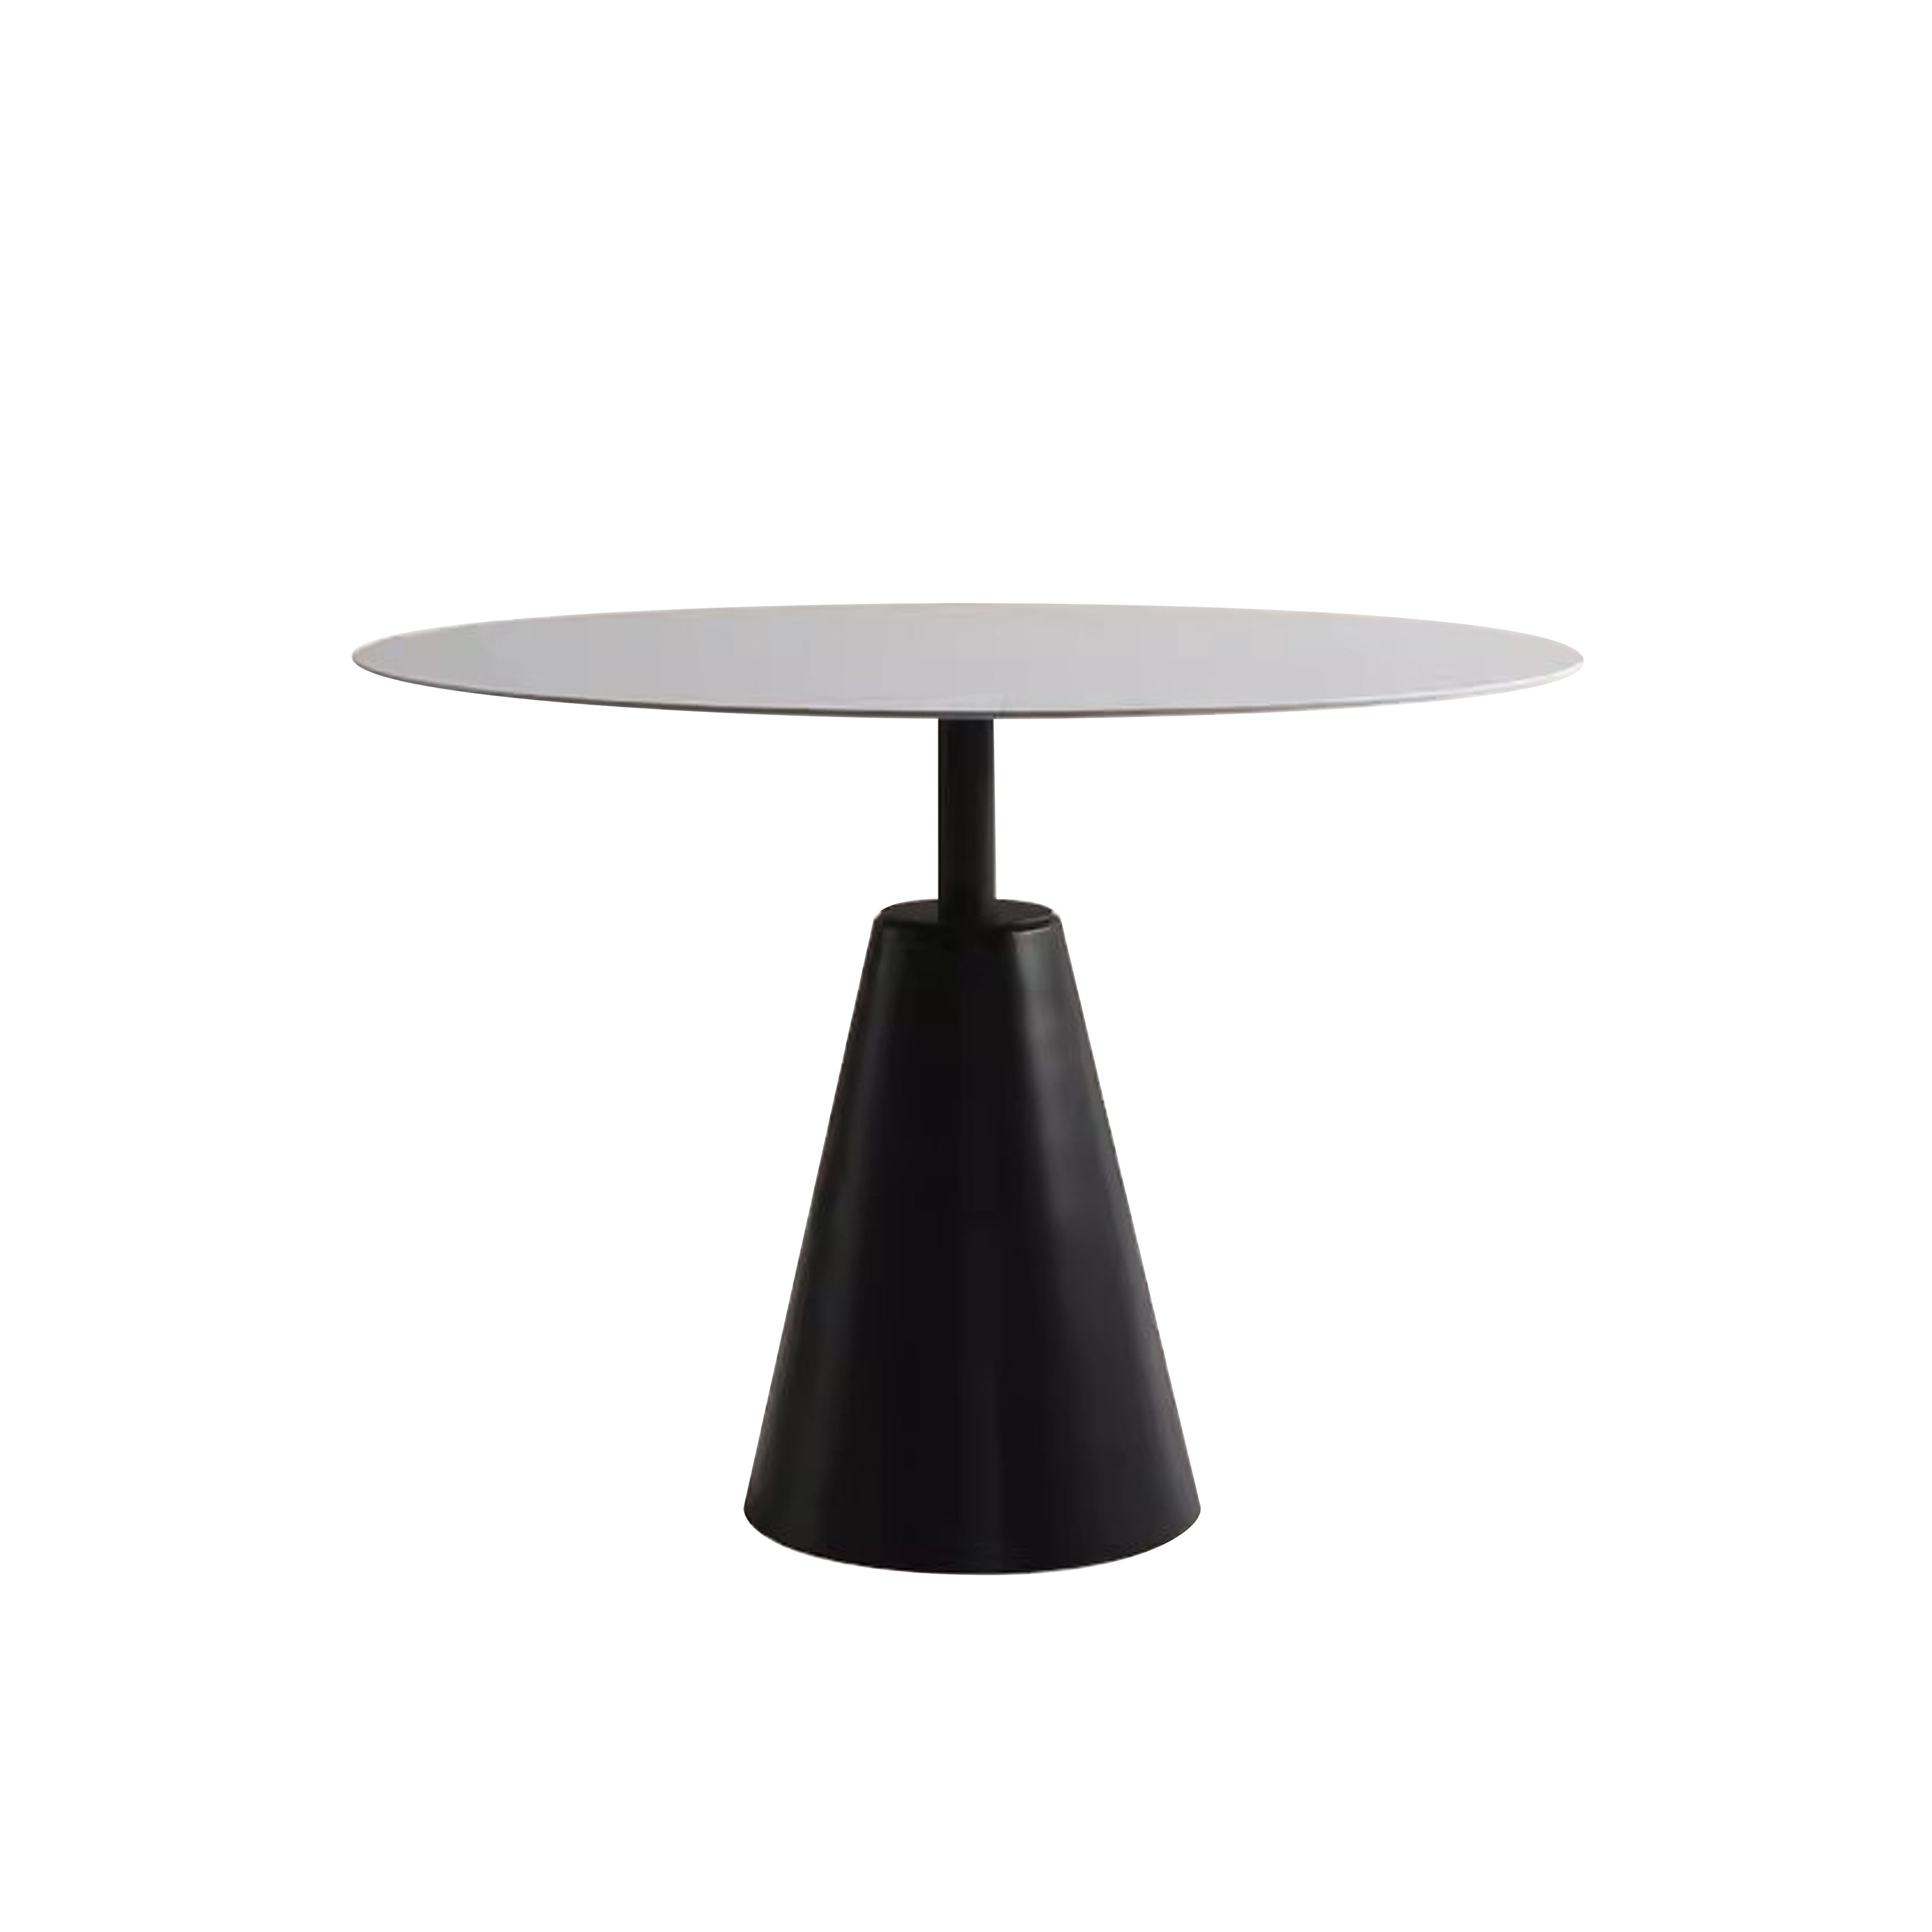 6.0 Table - Sintered Stone Dining Table (Dia600-1000mm)